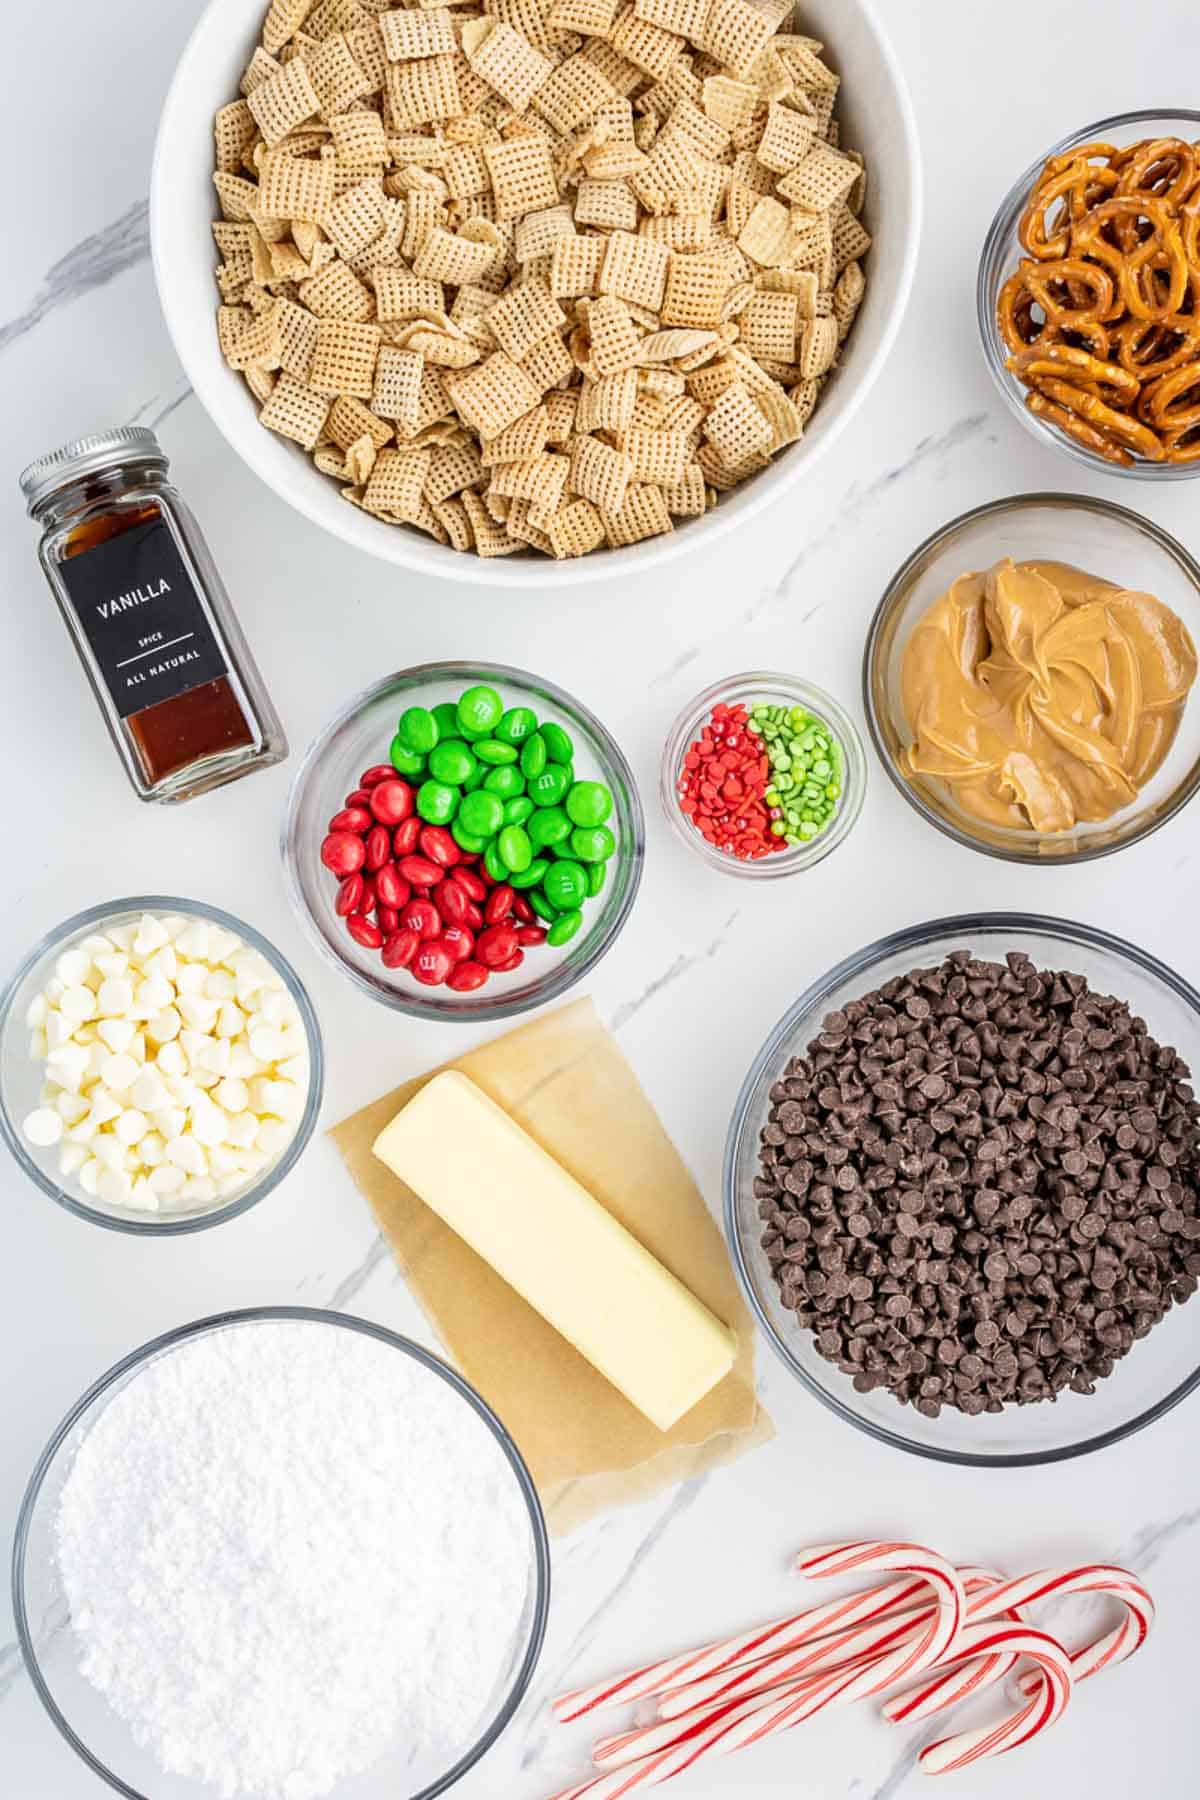 Ingredients needed to make Christmas Muddy Buddies laid out on a marble table.